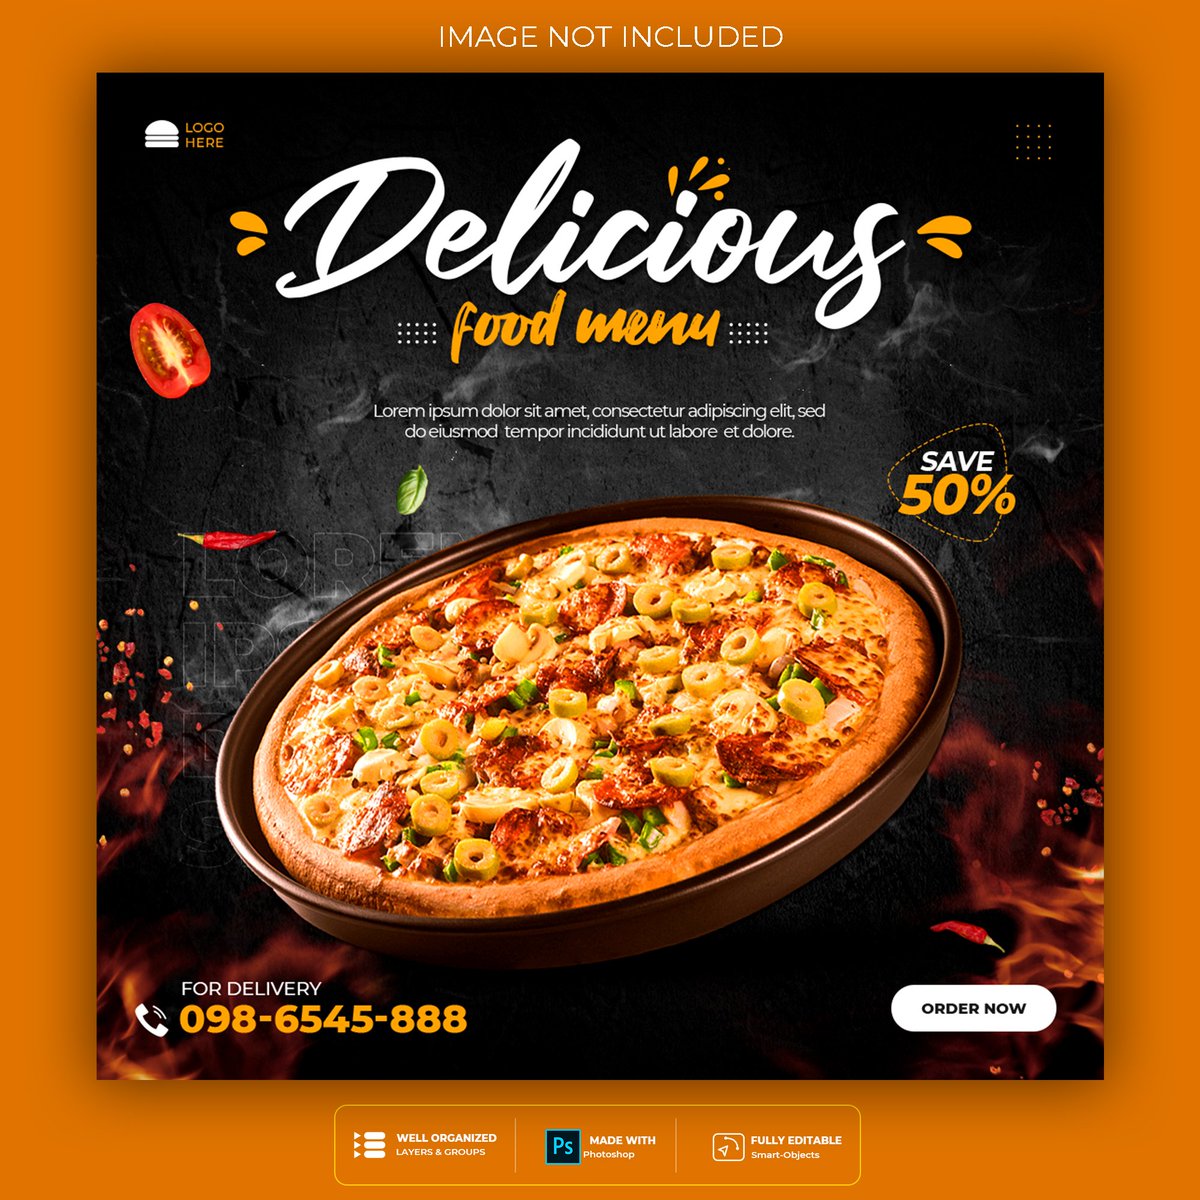 🍕🚀 Ready to turn your social media game up a notch? Say hello to our sizzling social media banner, served with a side of pizza-inspired hashtags! 📲💥
#SocialMediaBanner #PizzaHashtags #DigitalMarketing #OnlineVisibility #TwitterMagic #SocialMediaStrategy #BoostYourBrand